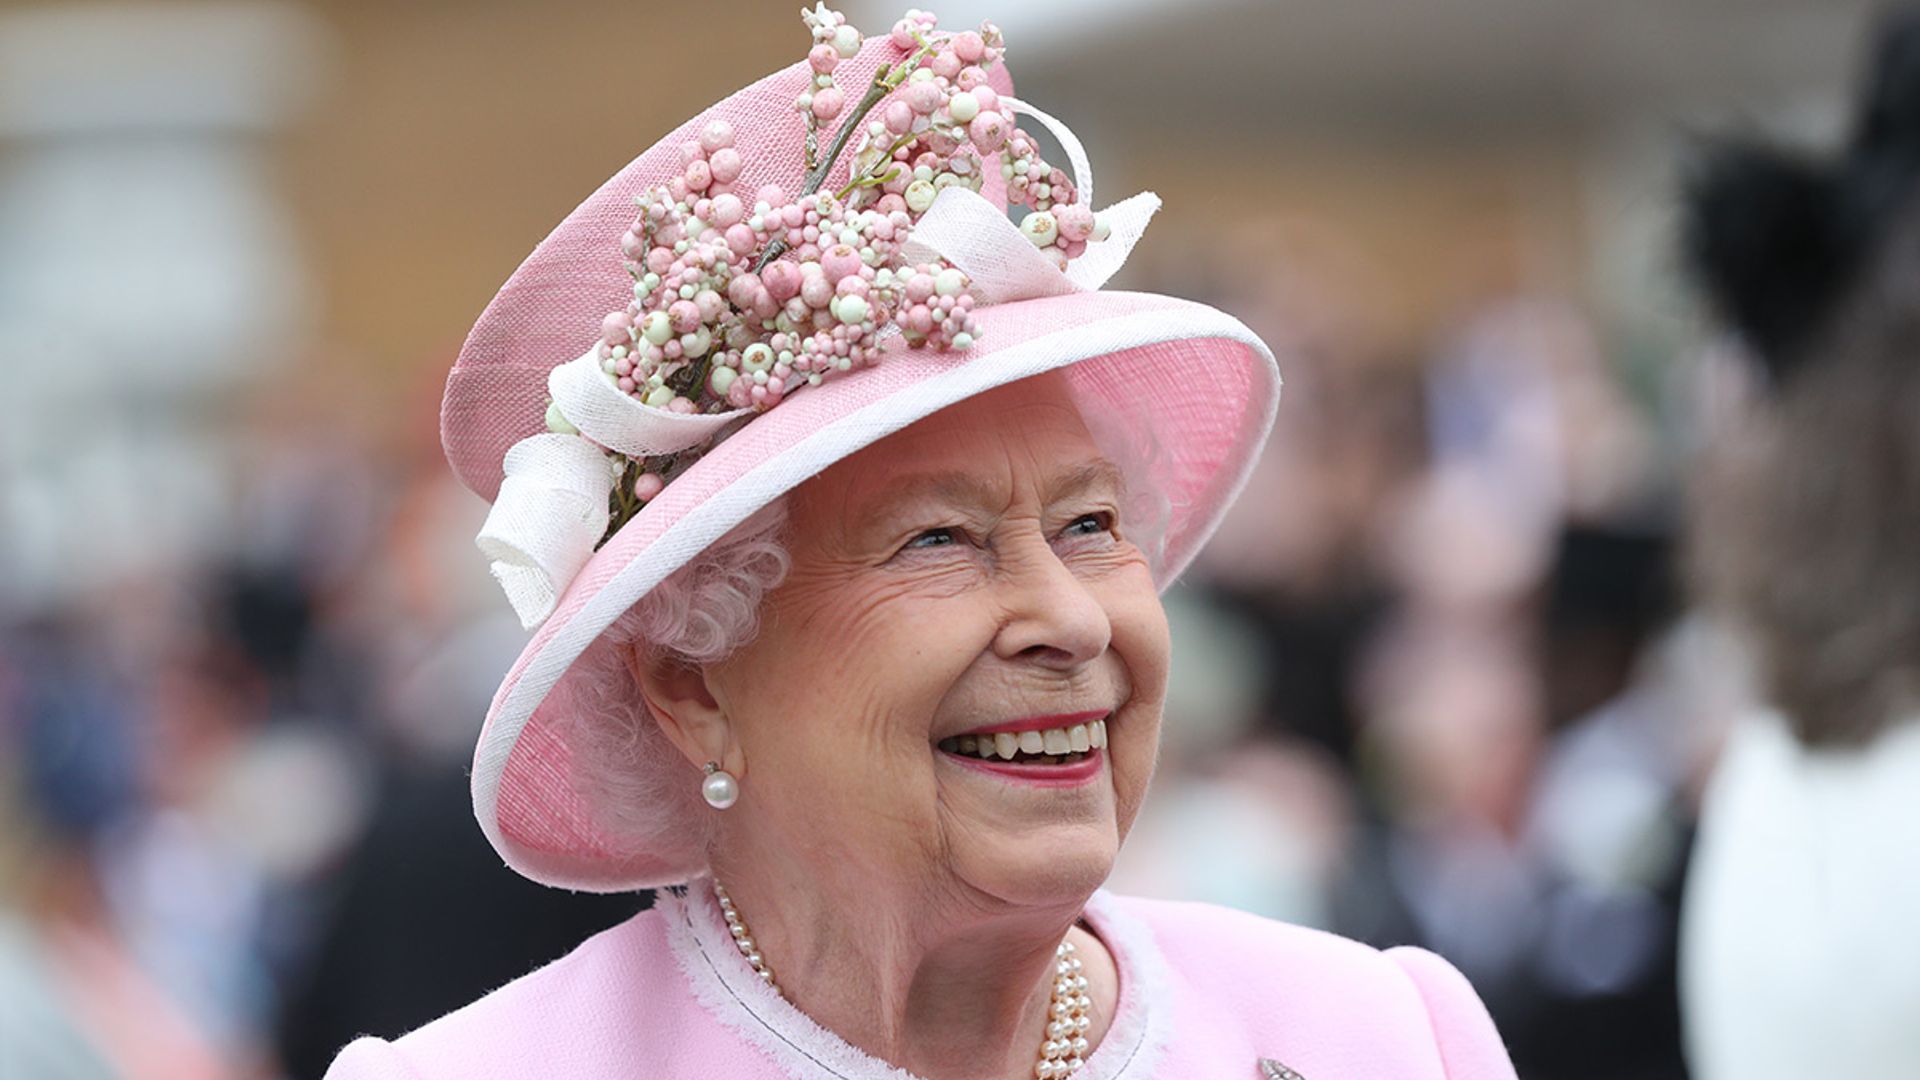 The Queen's low-key birthday parade: special guest, music and more details